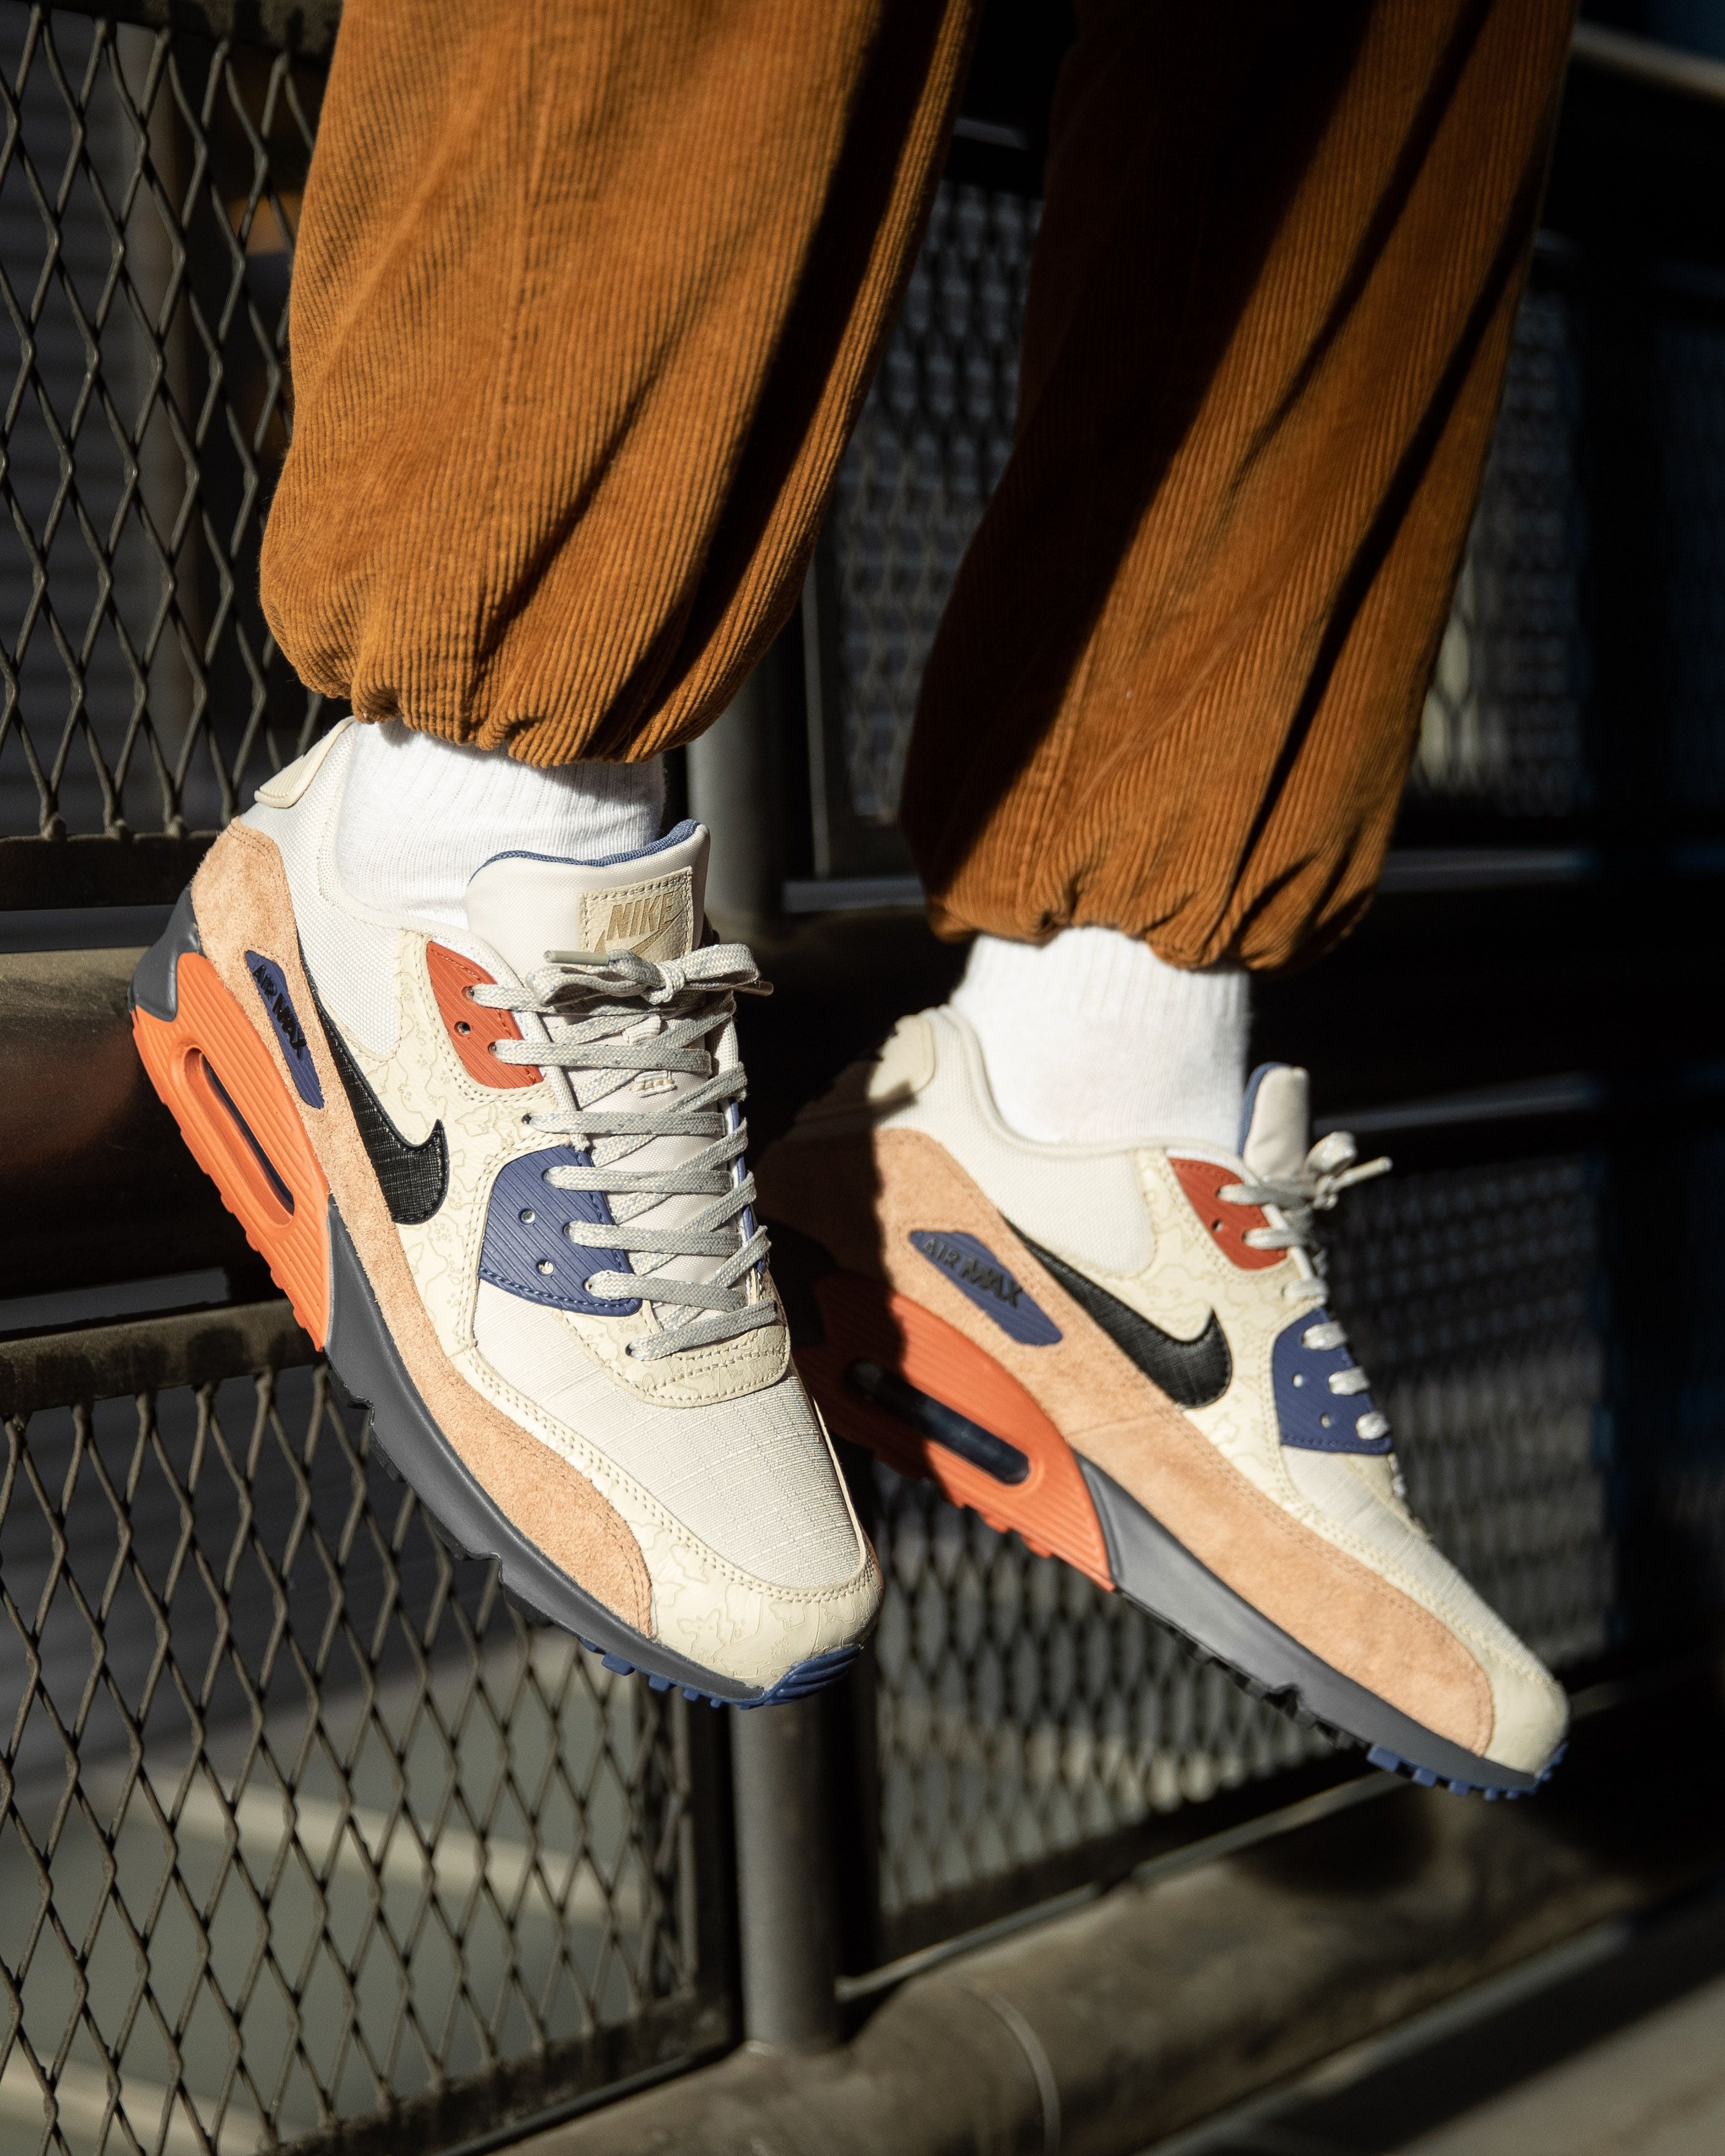 hiërarchie tarief Iedereen Titolo on Twitter: "ONLINE NOW 🔥 Nike Air Max 90 NRG "Desert Sand" check  it out ➡️ https://t.co/rVI7bBGk10 sizerun 💃 US 5 (37.5) - US 13 (47.5)  🚶🏻 style code 🔎 CI5646-001 #